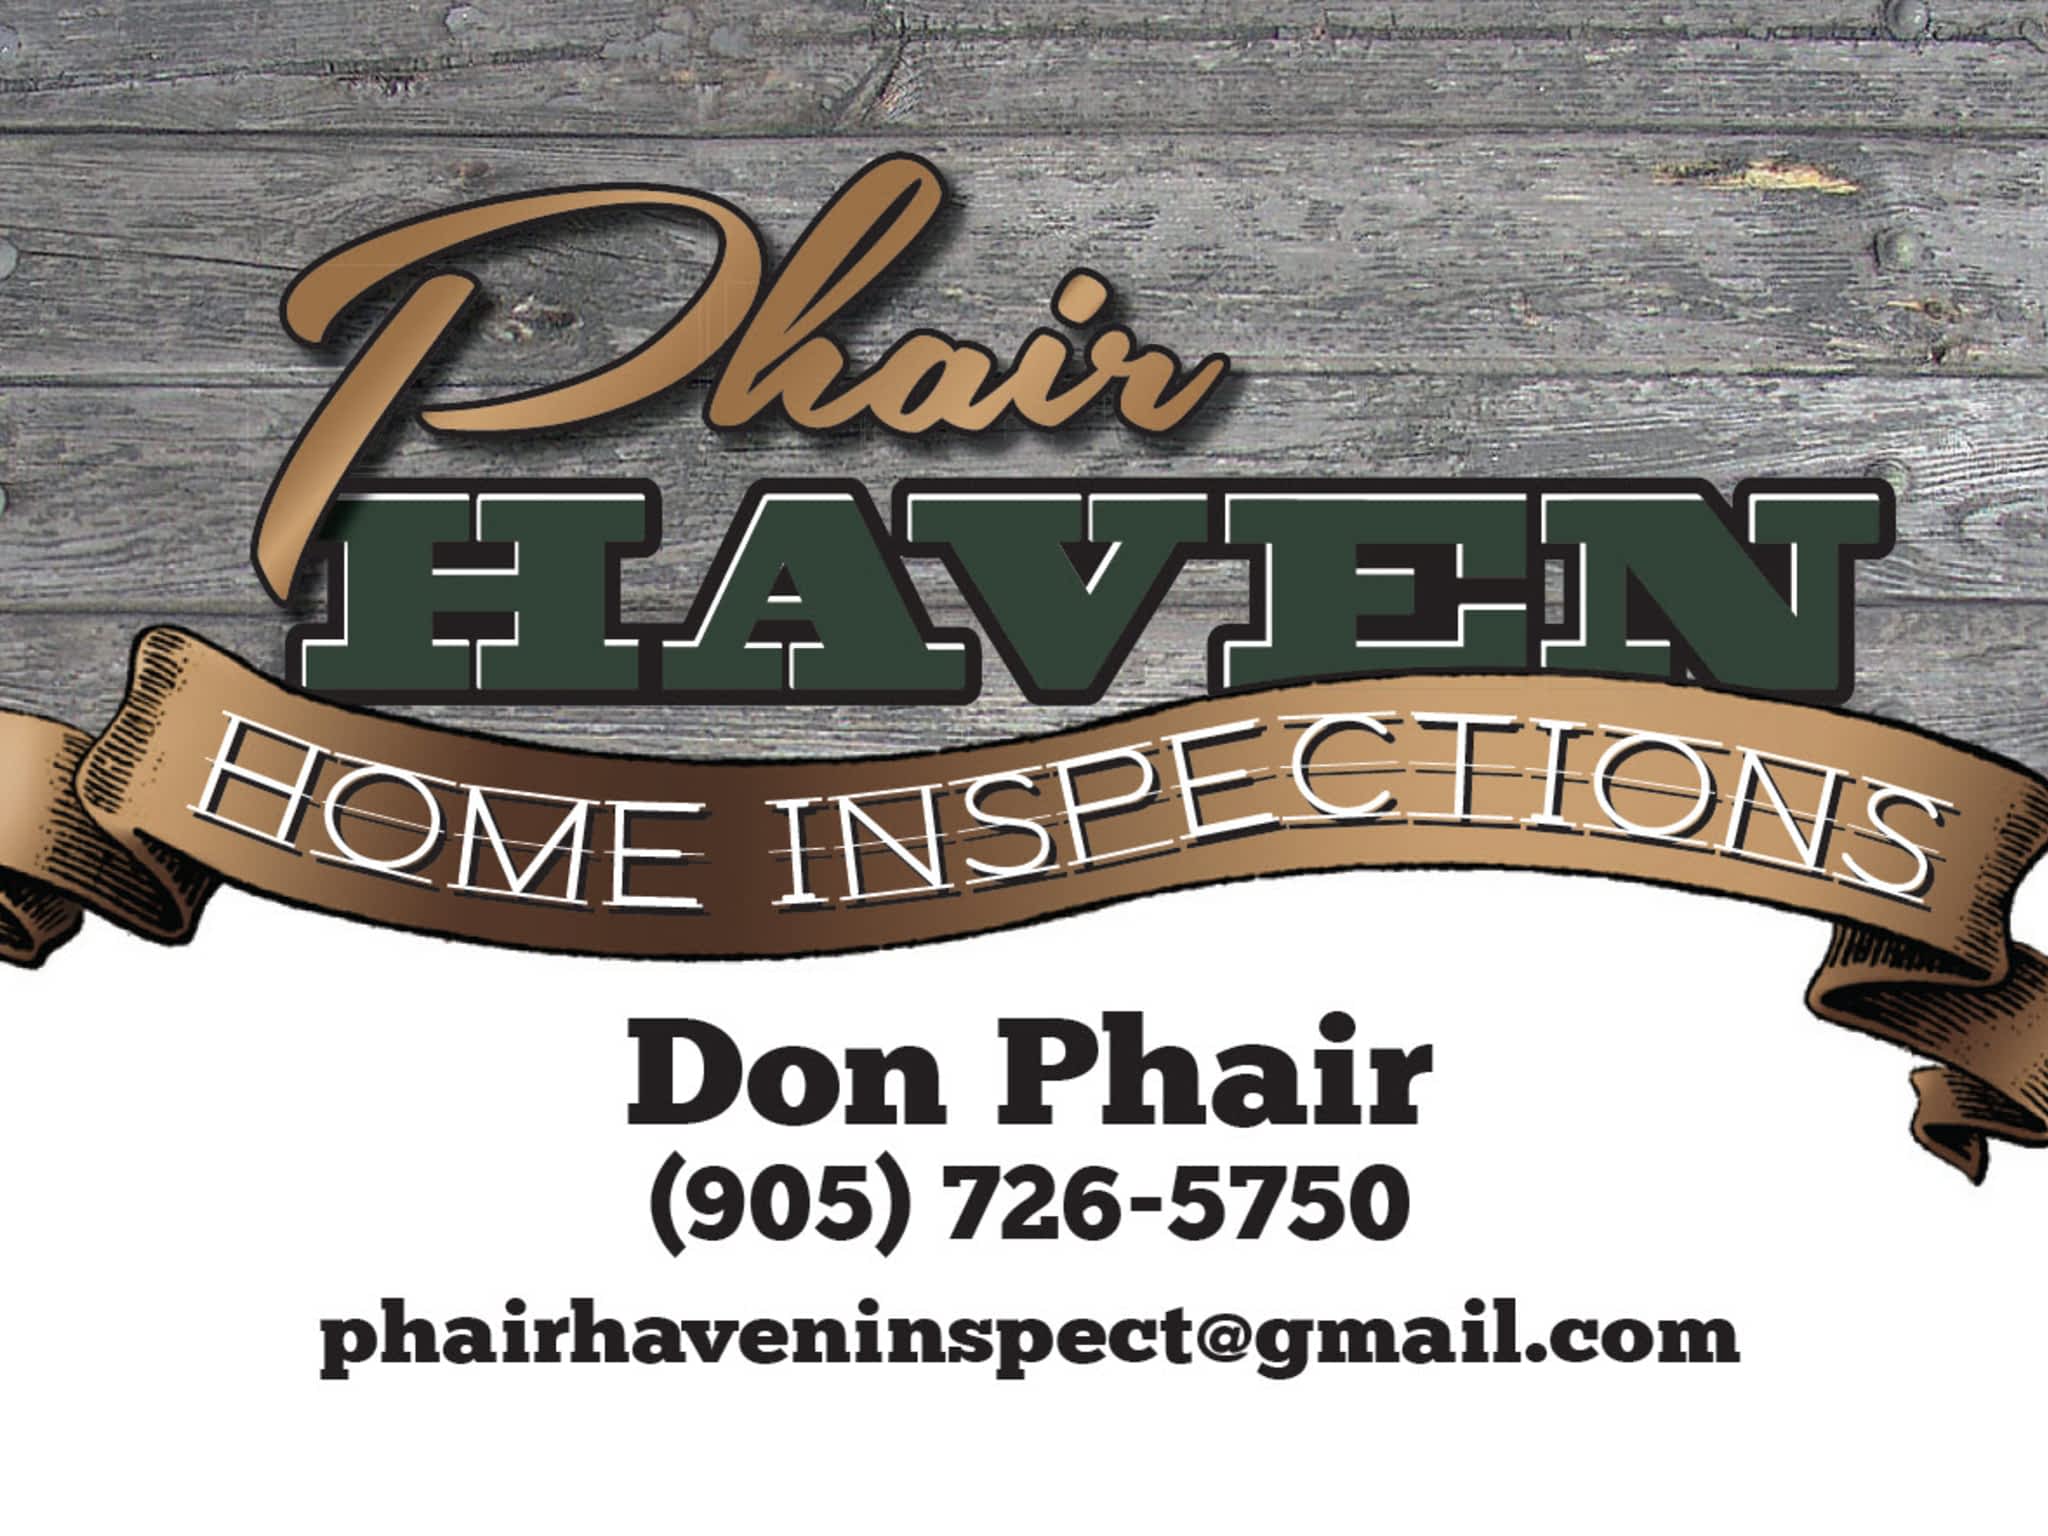 photo Phair Haven Home Inspections